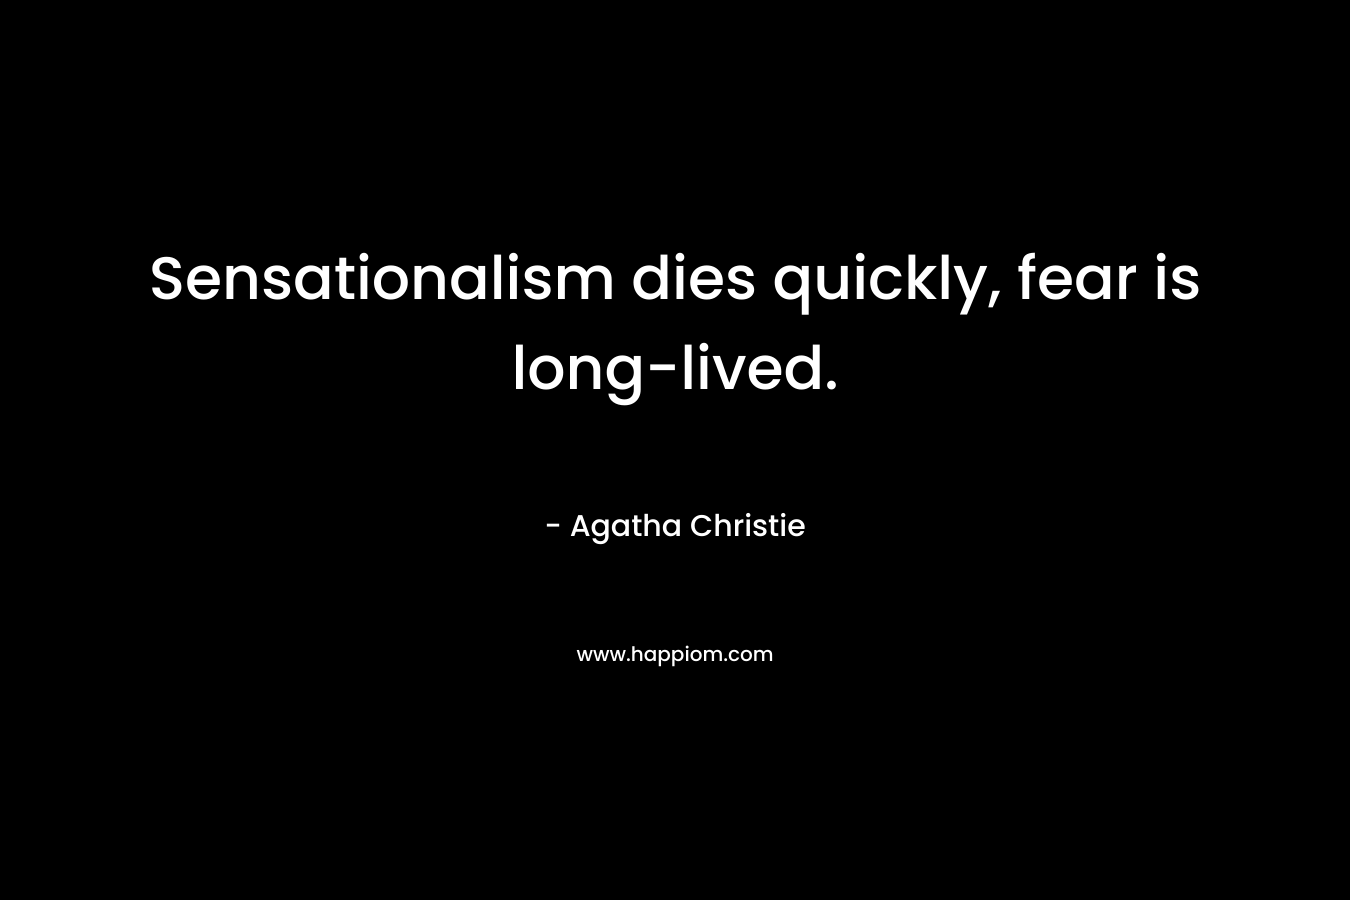 Sensationalism dies quickly, fear is long-lived. – Agatha Christie